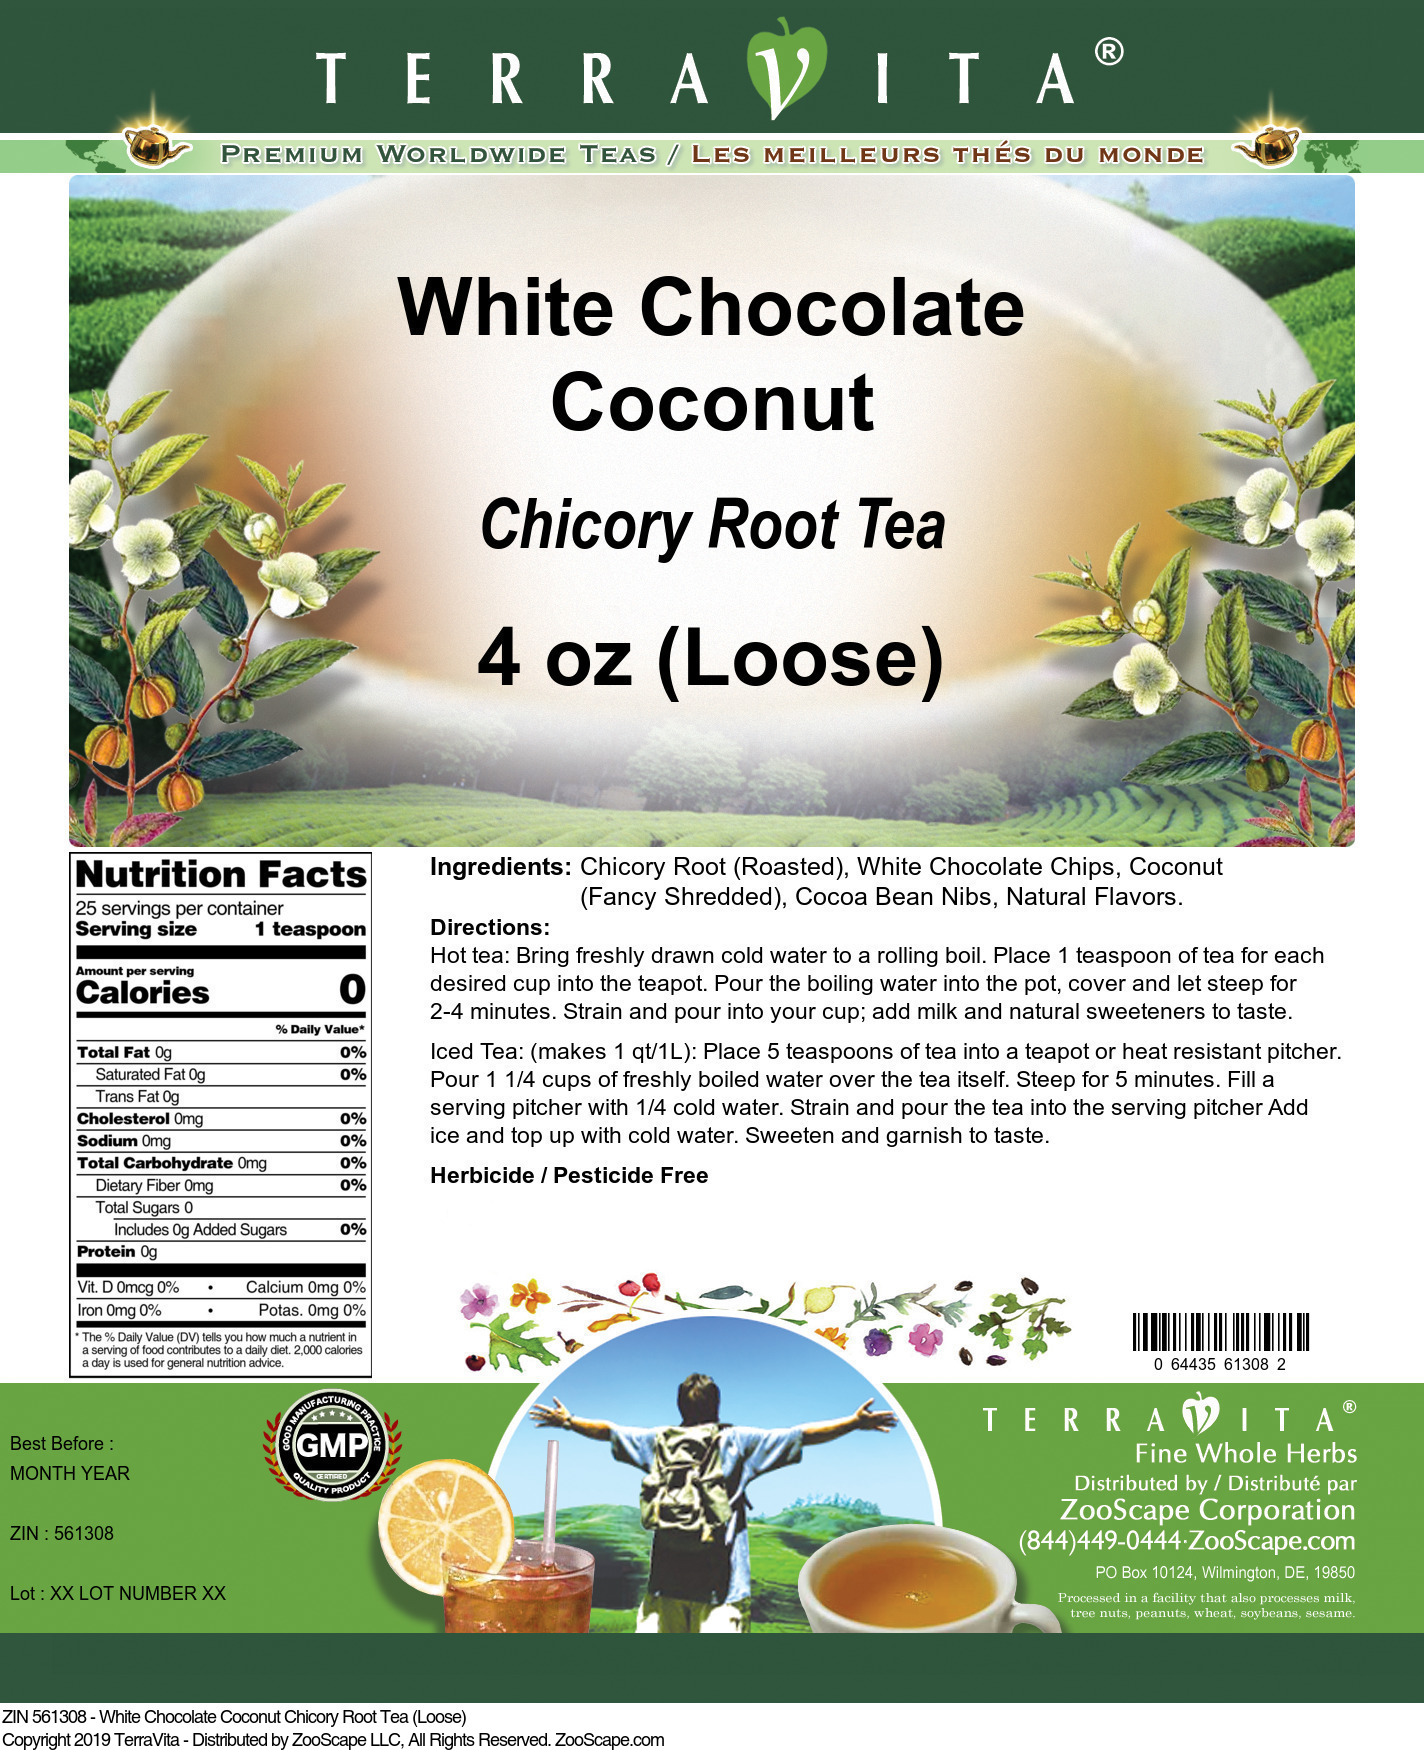 White Chocolate Coconut Chicory Root Tea (Loose) - Label